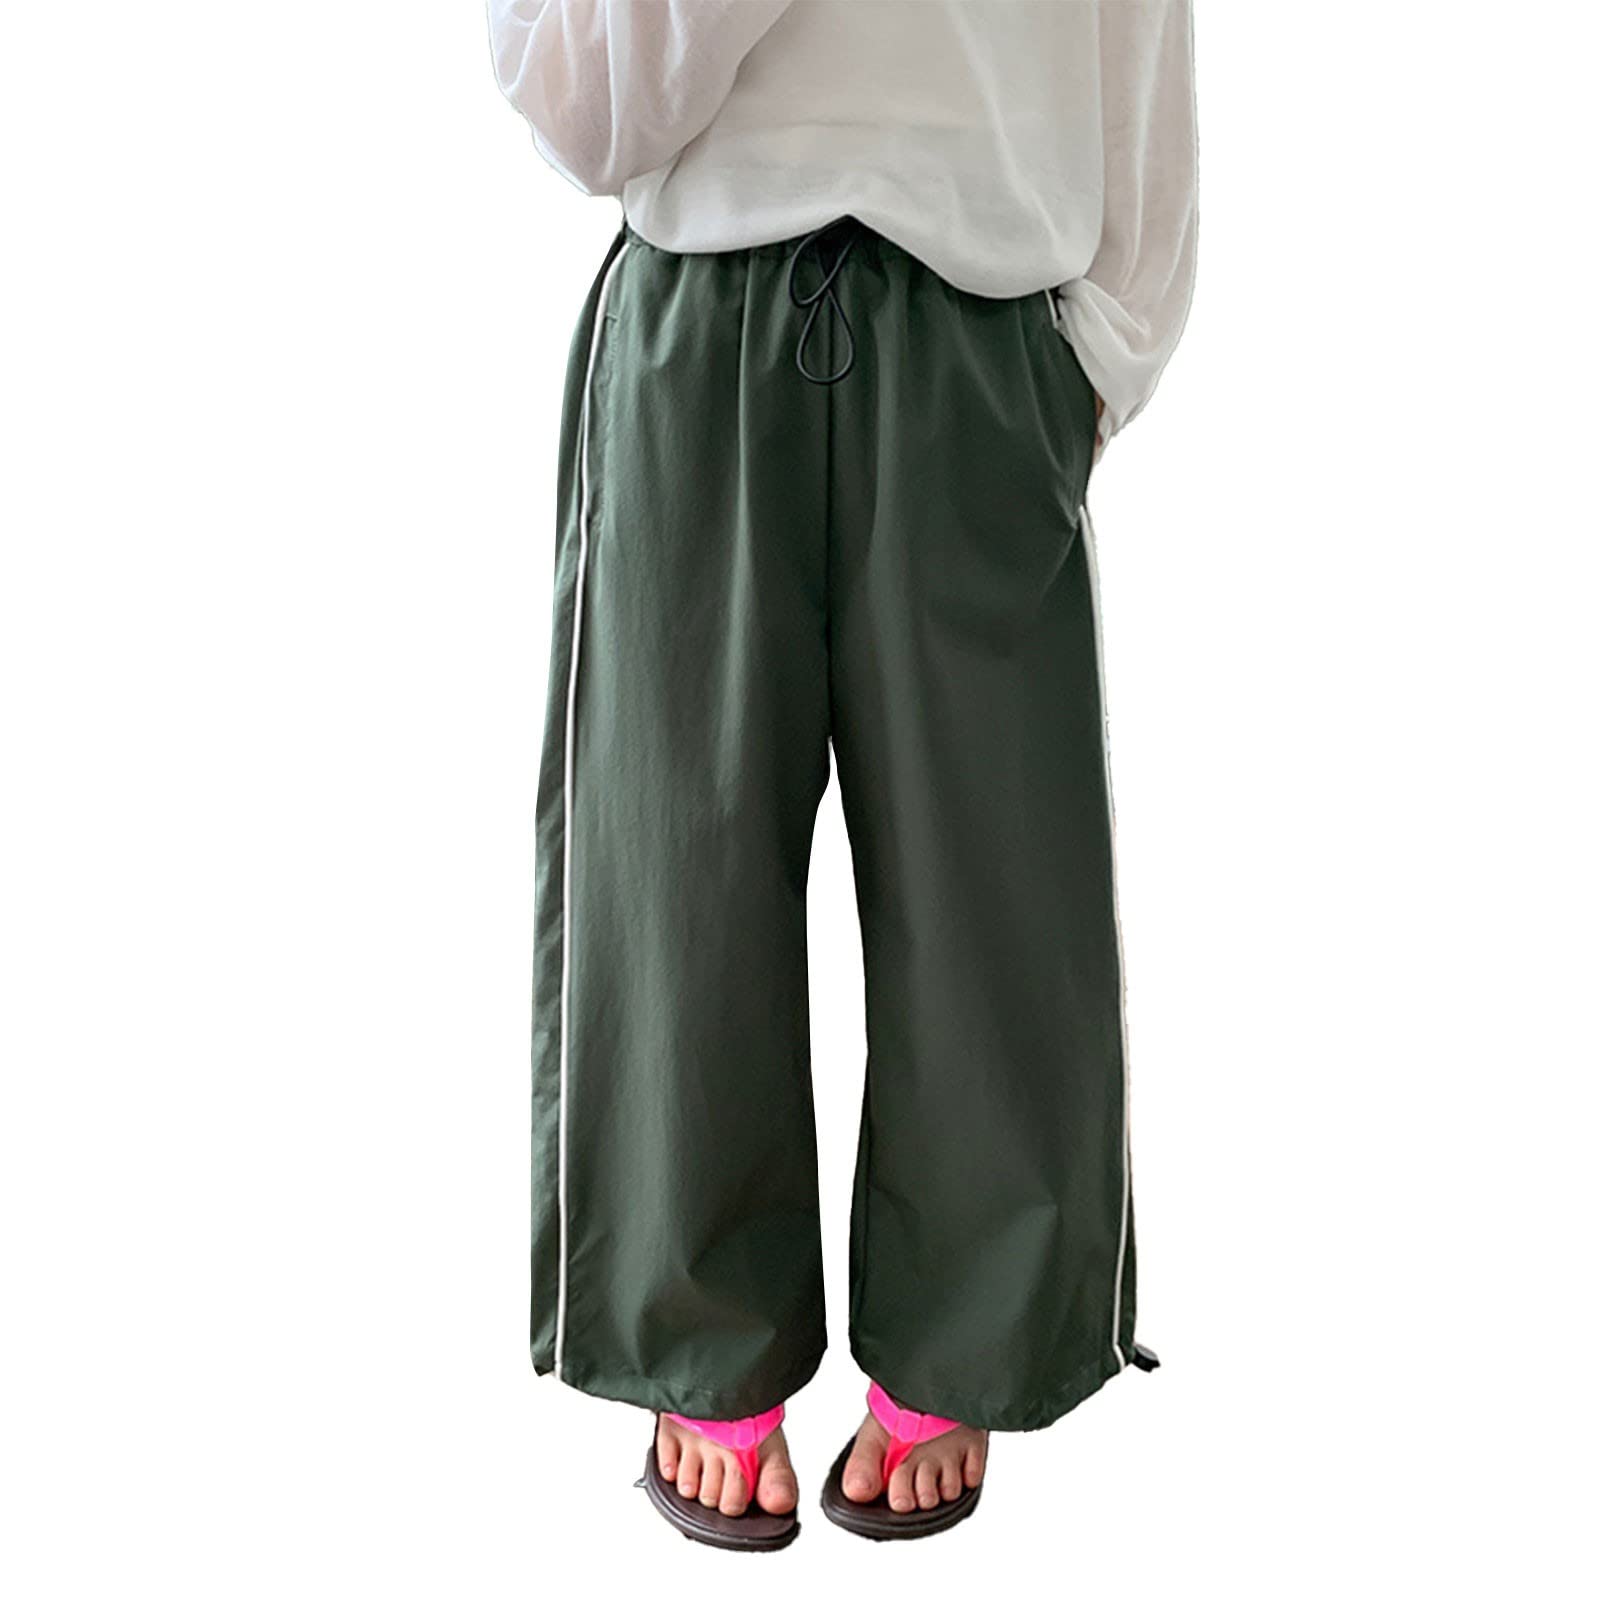  Rolanko Girls Jogger Cargo Pants with Pocket Bright